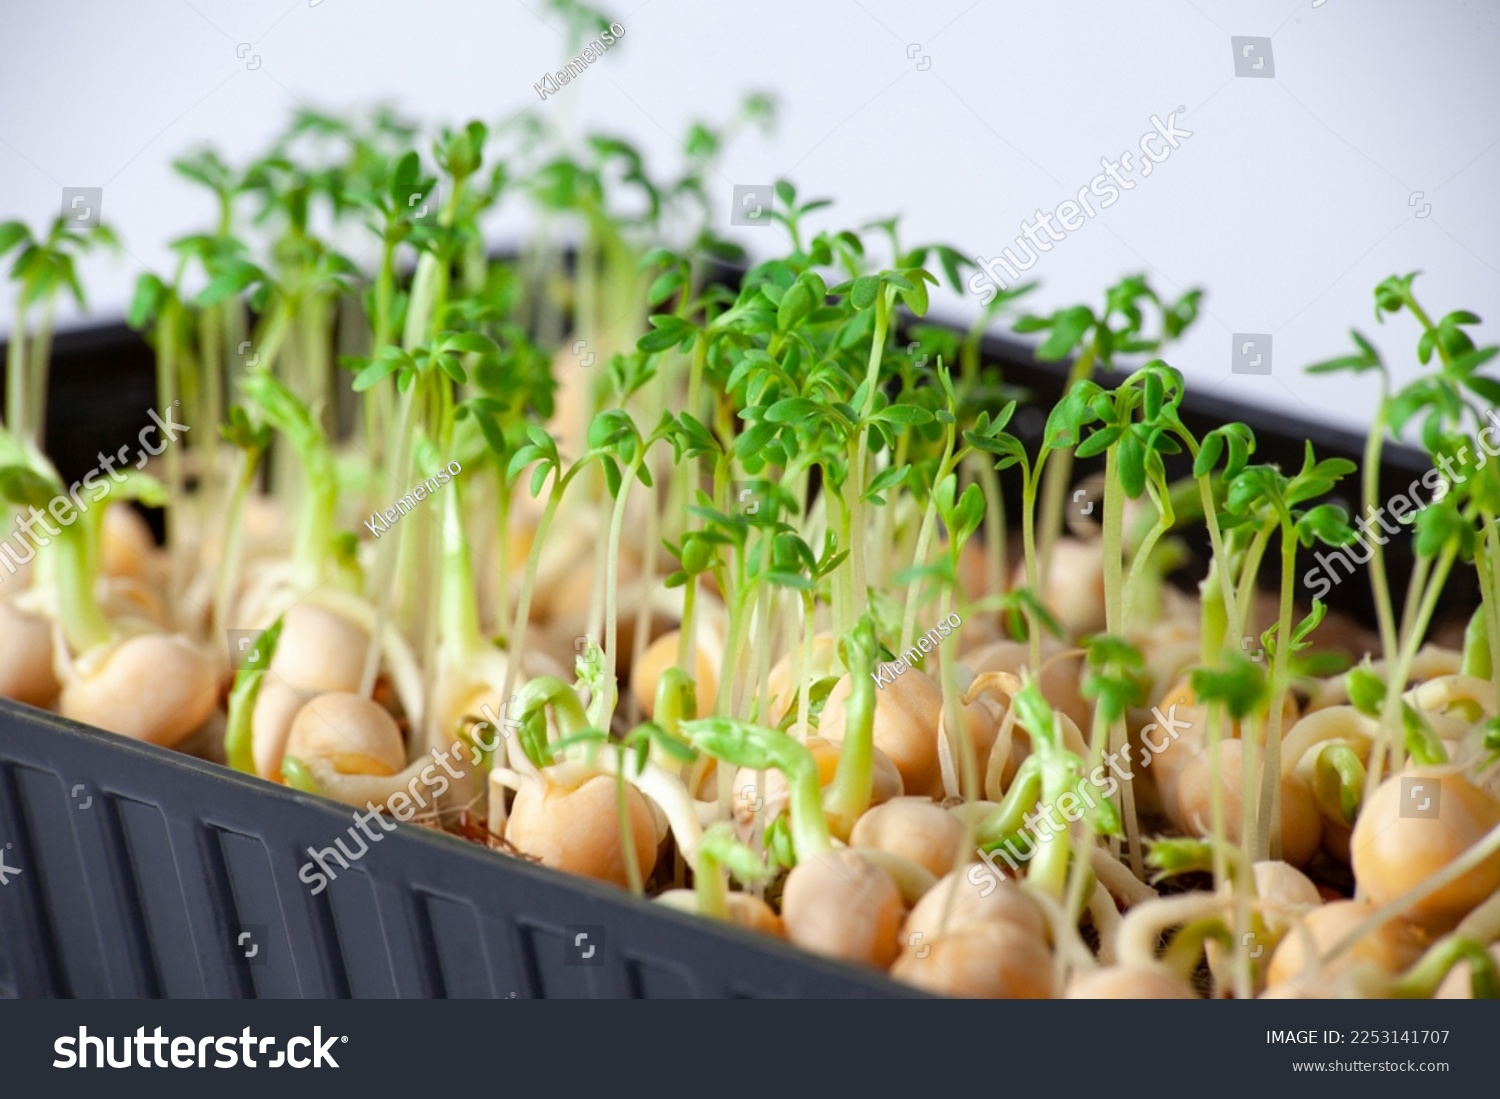 Close-up of peas microgreens with seeds and roots. Sprouting Microgreens. Seed Germination at home. Vegan and healthy eating concept. Sprouted peas Seeds, Micro greens. Growing sprouts. Hydroponic. #2253141707